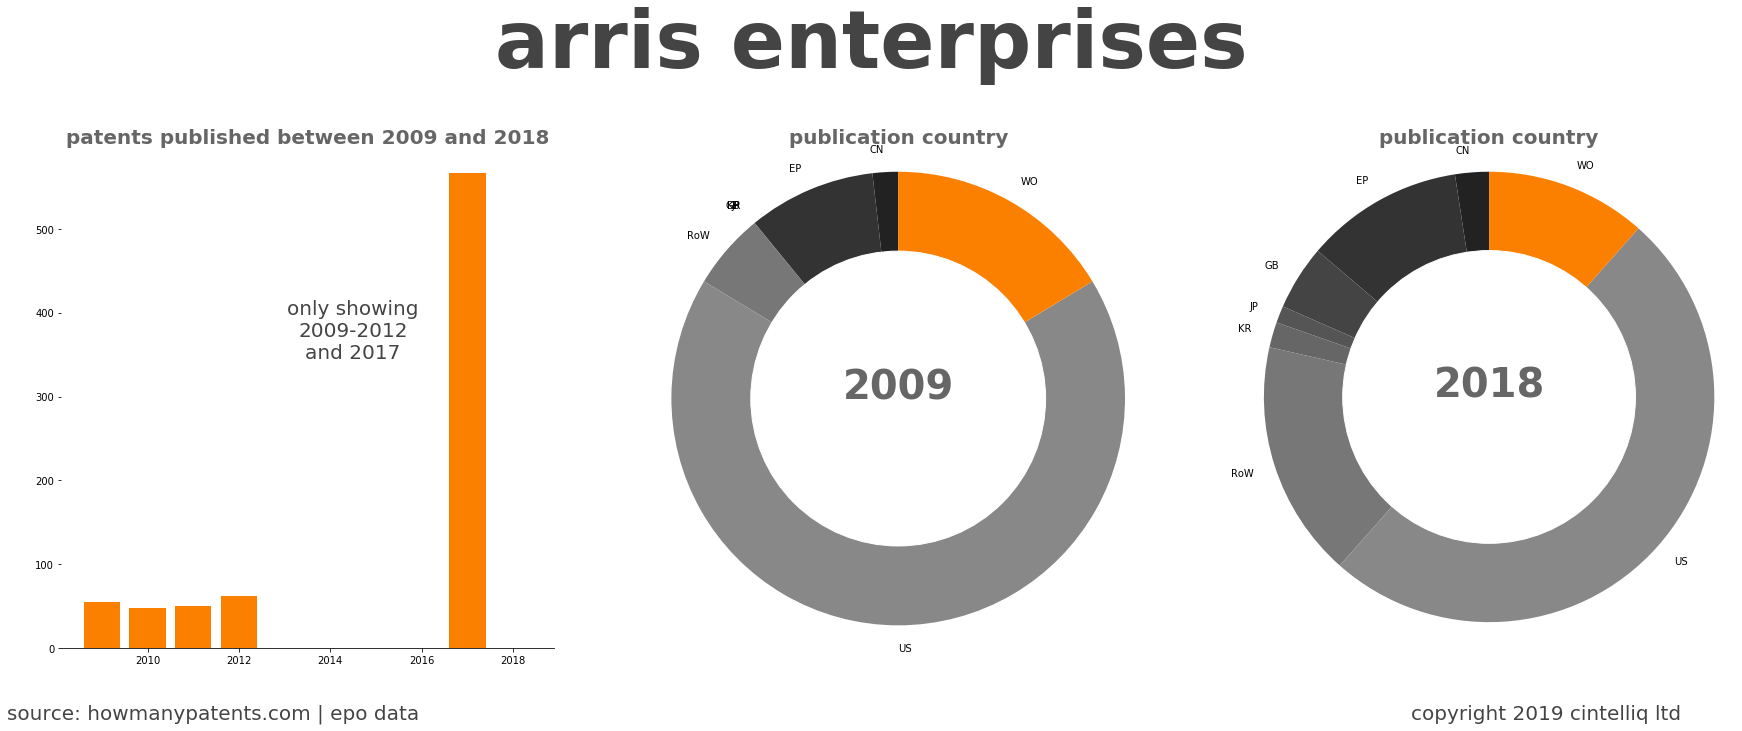 summary of patents for Arris Enterprises